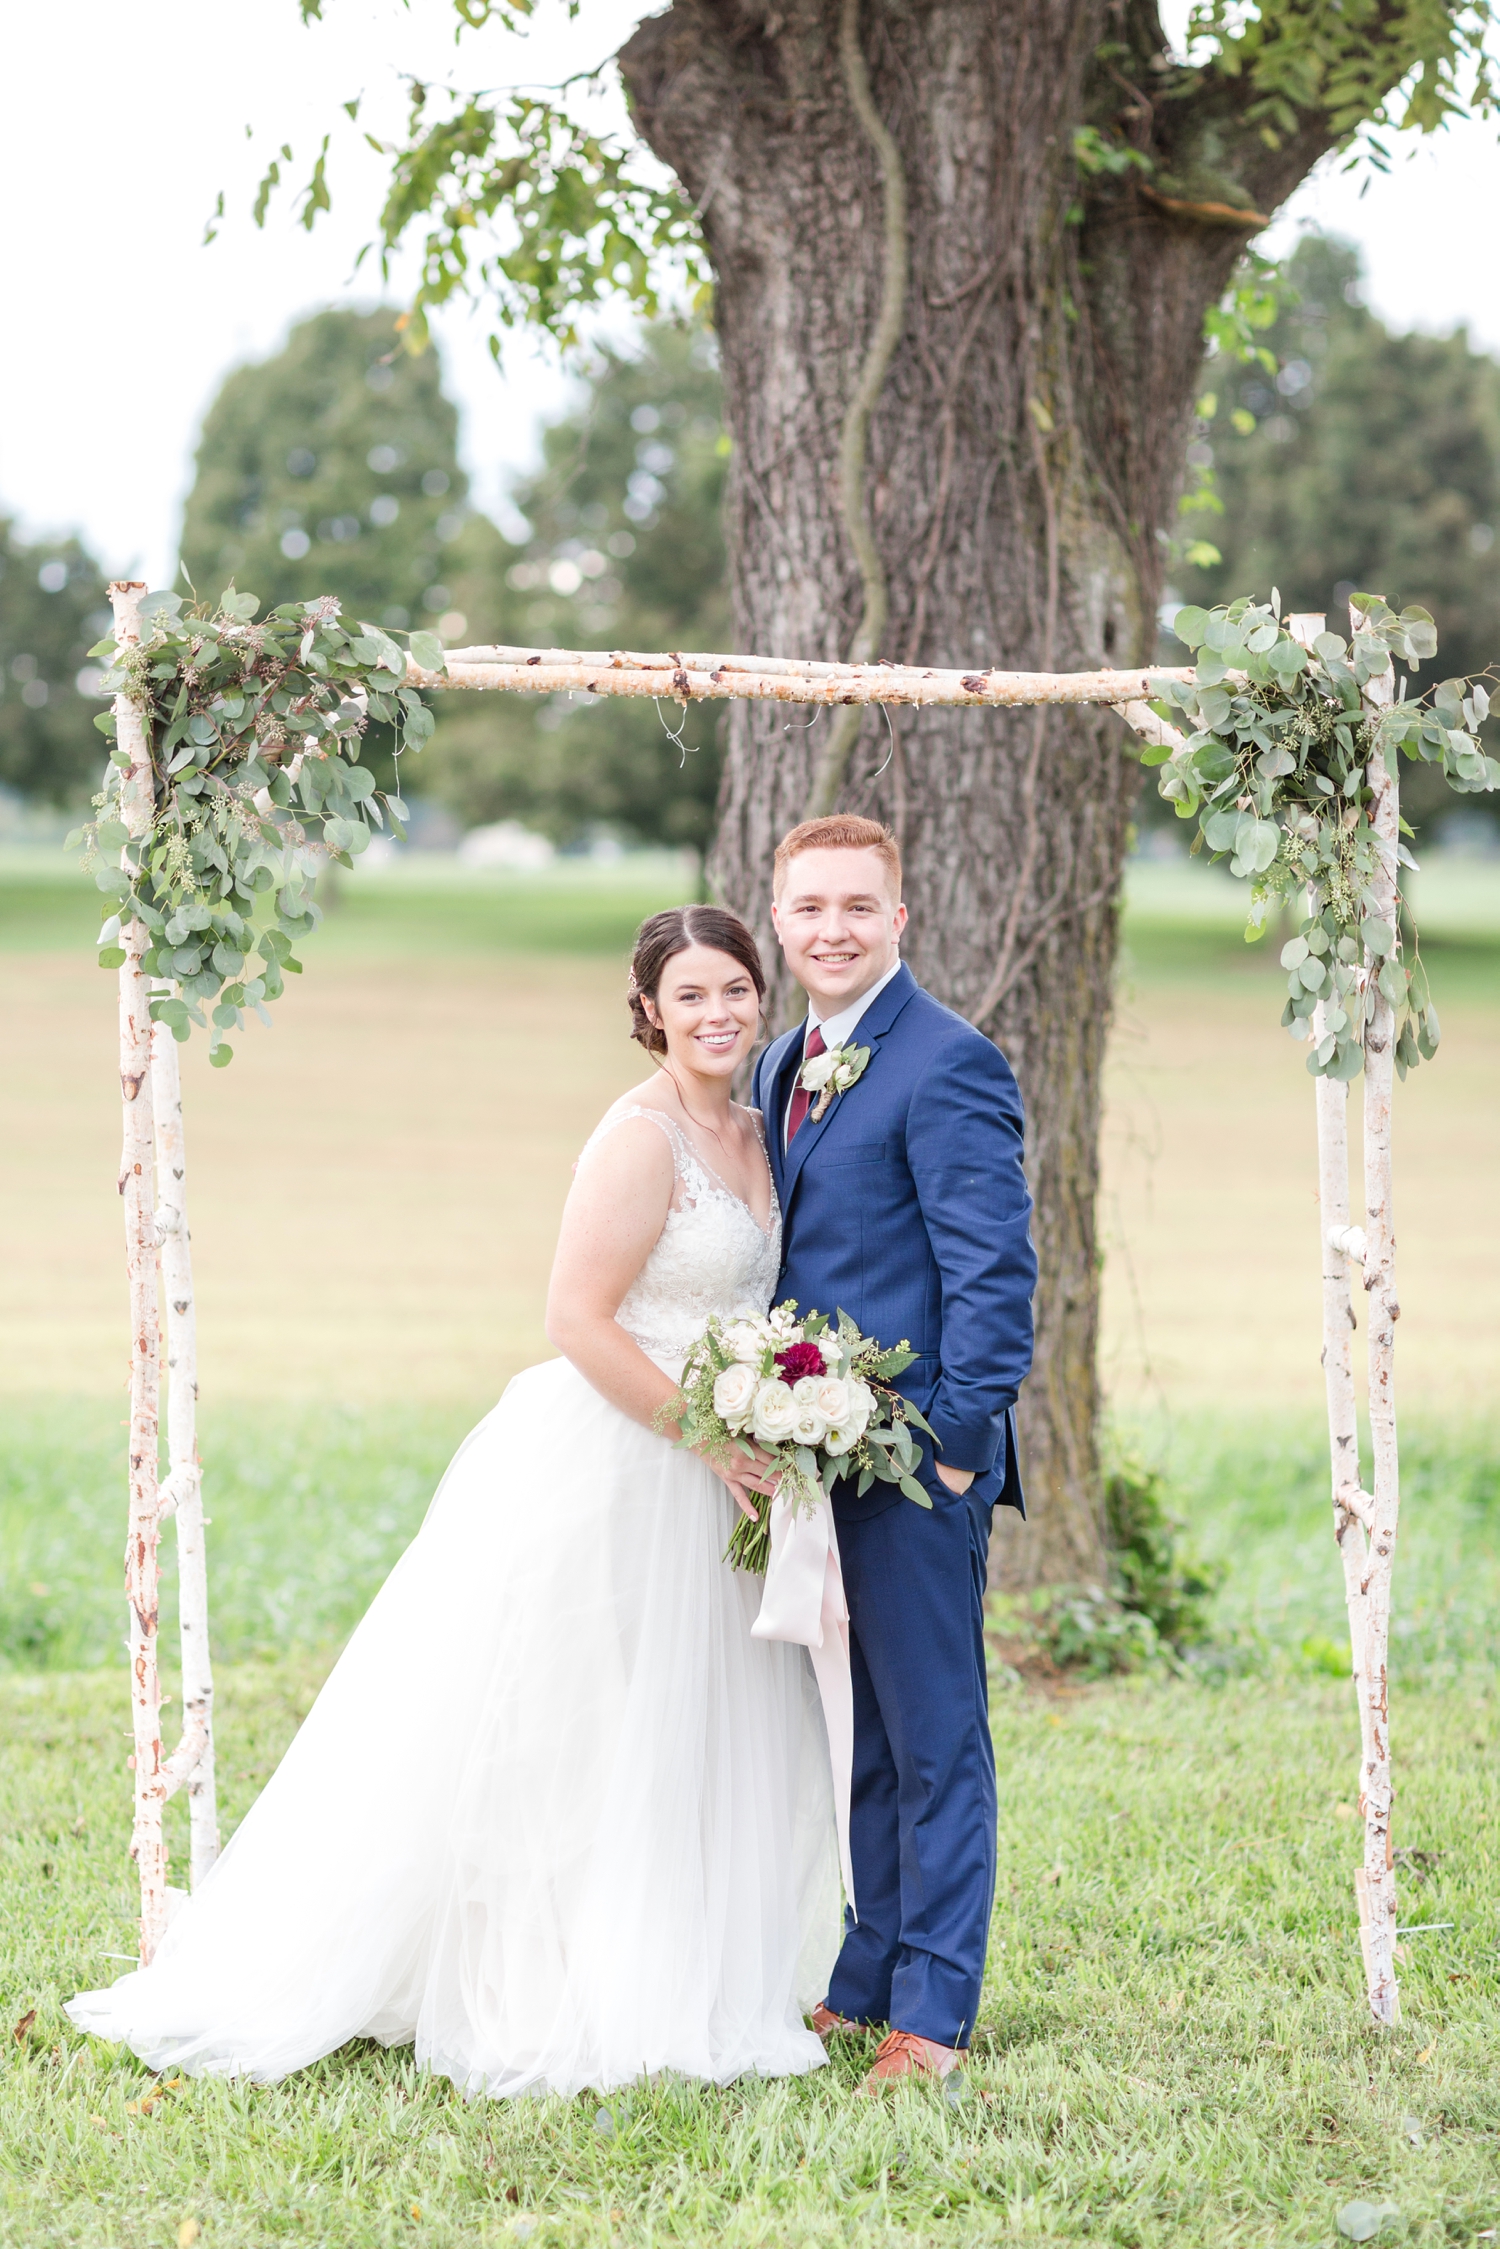  This was the arch Mark and Shelby were planning on getting married under until it rained and they had to move the ceremony inside. We had to get some pictures under it because it was so cute! 